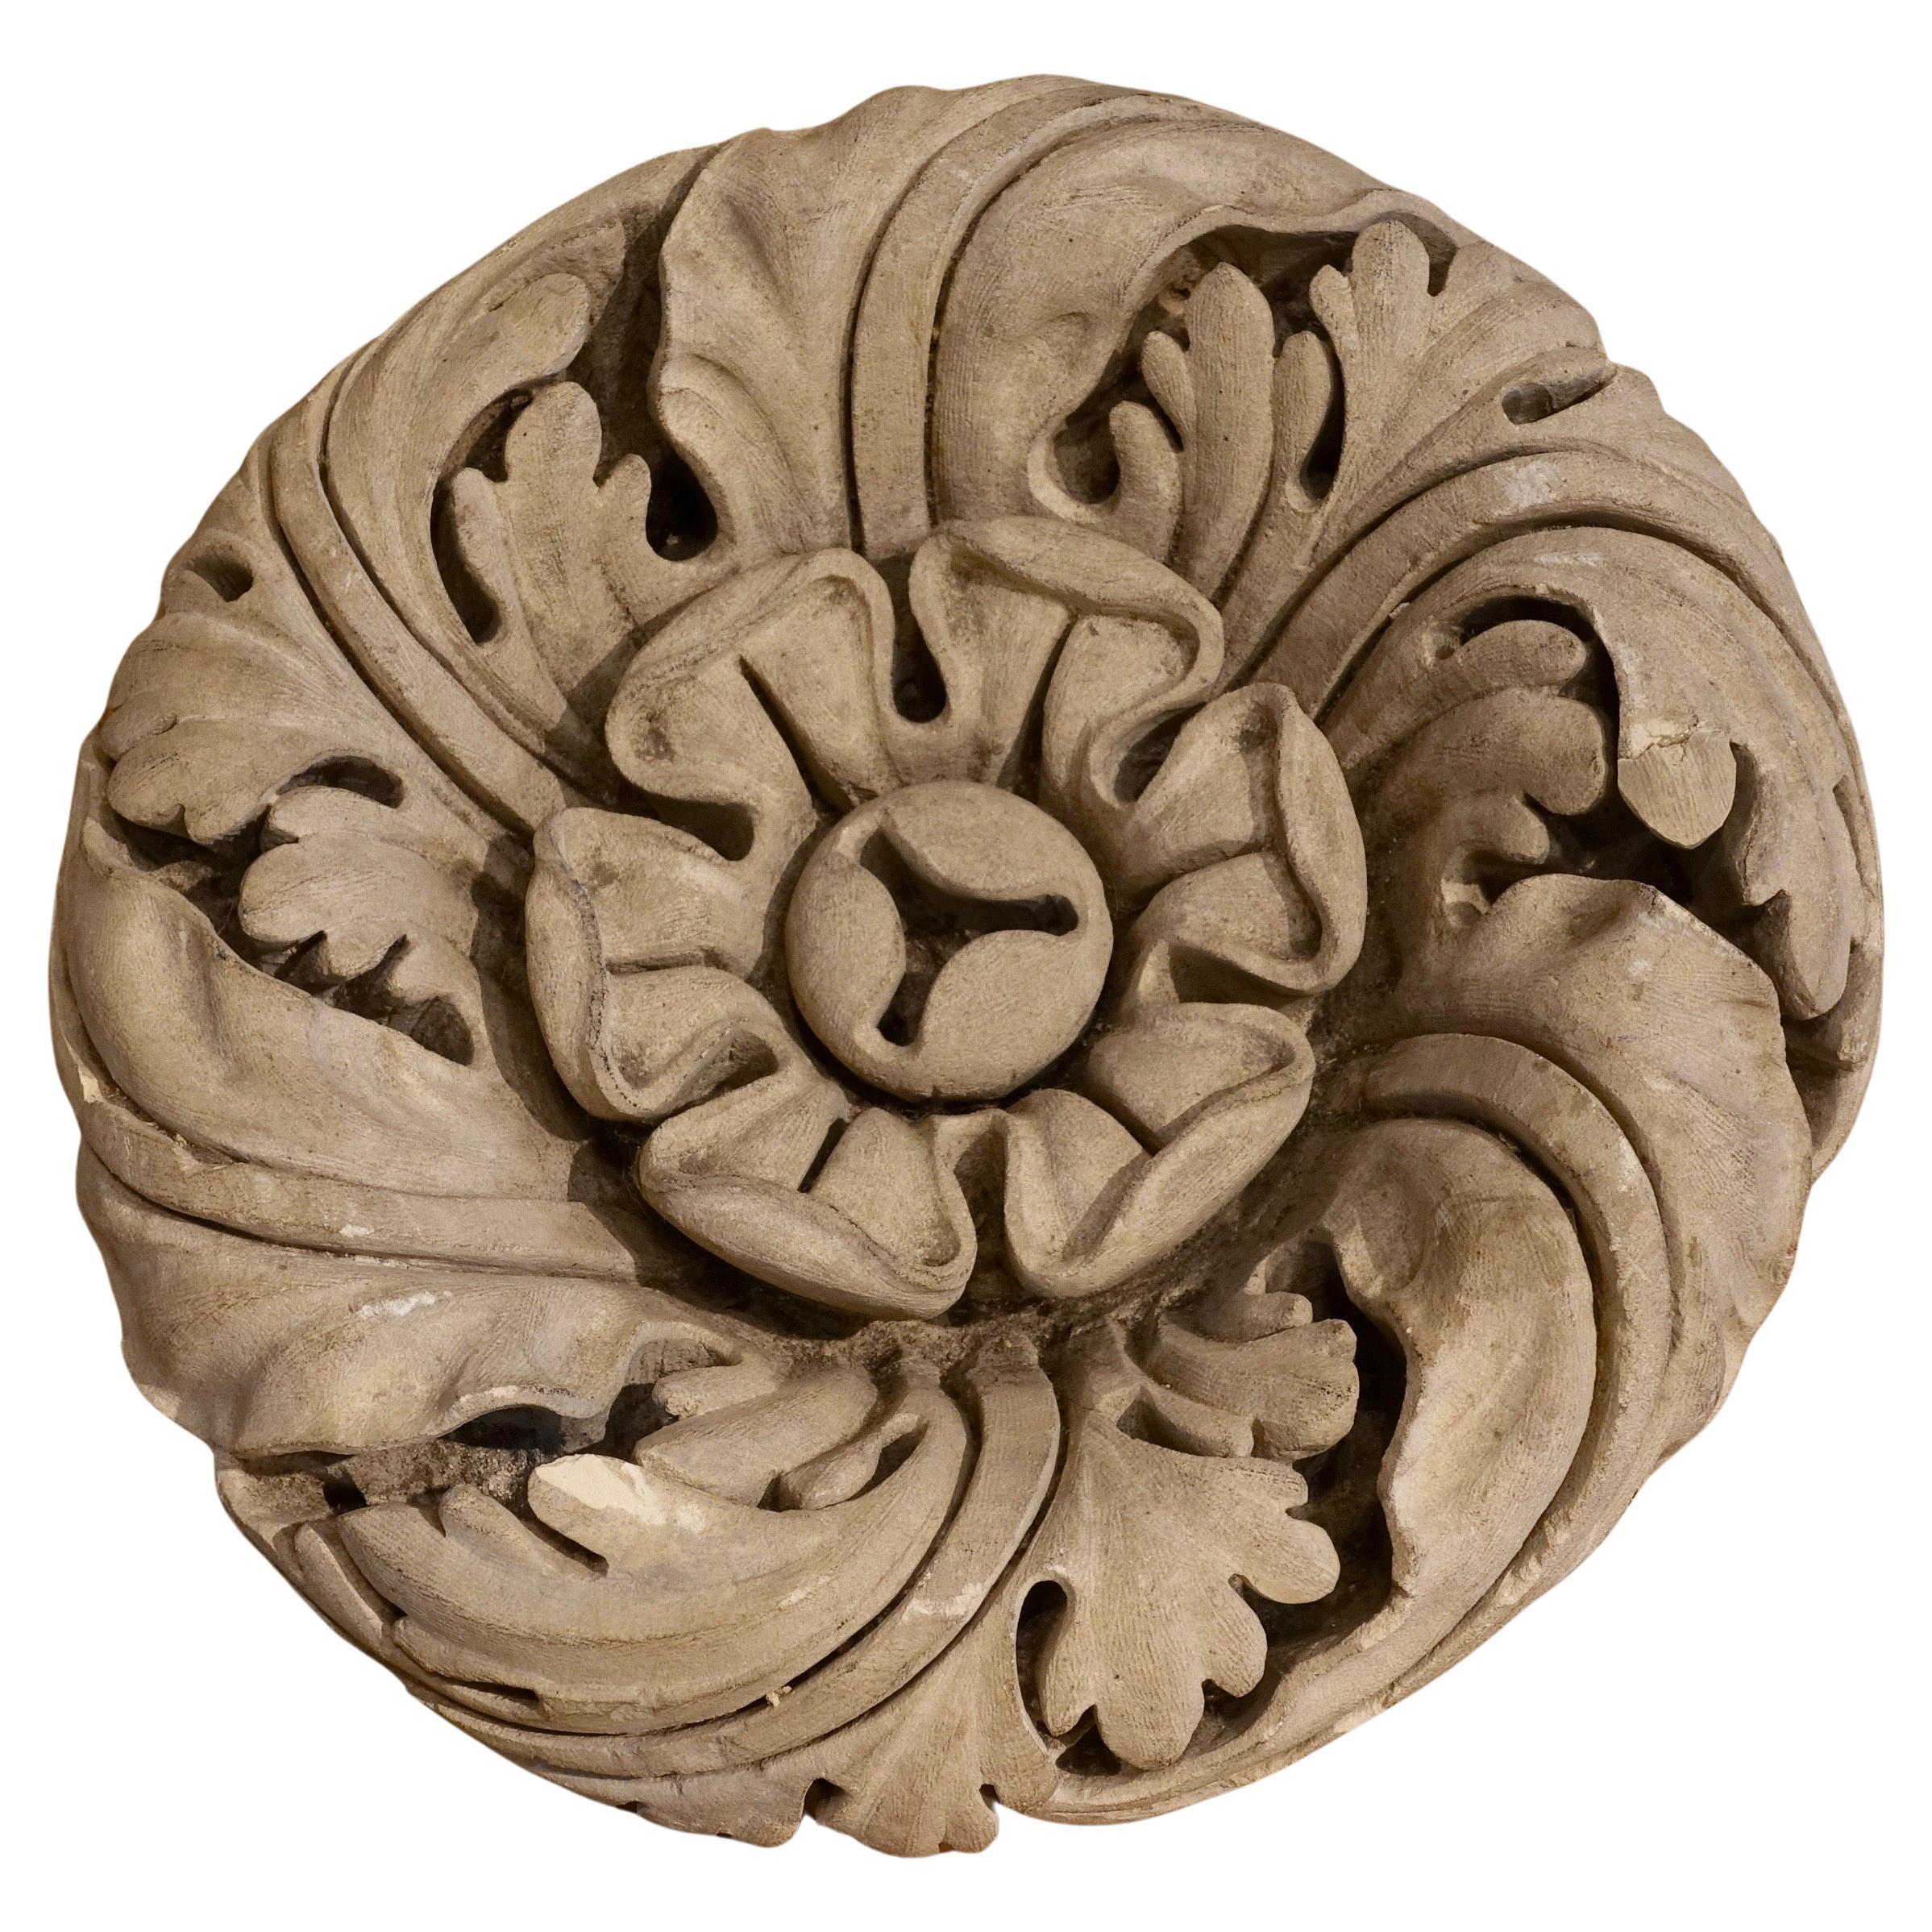 Large carved stone rosette - 18th century